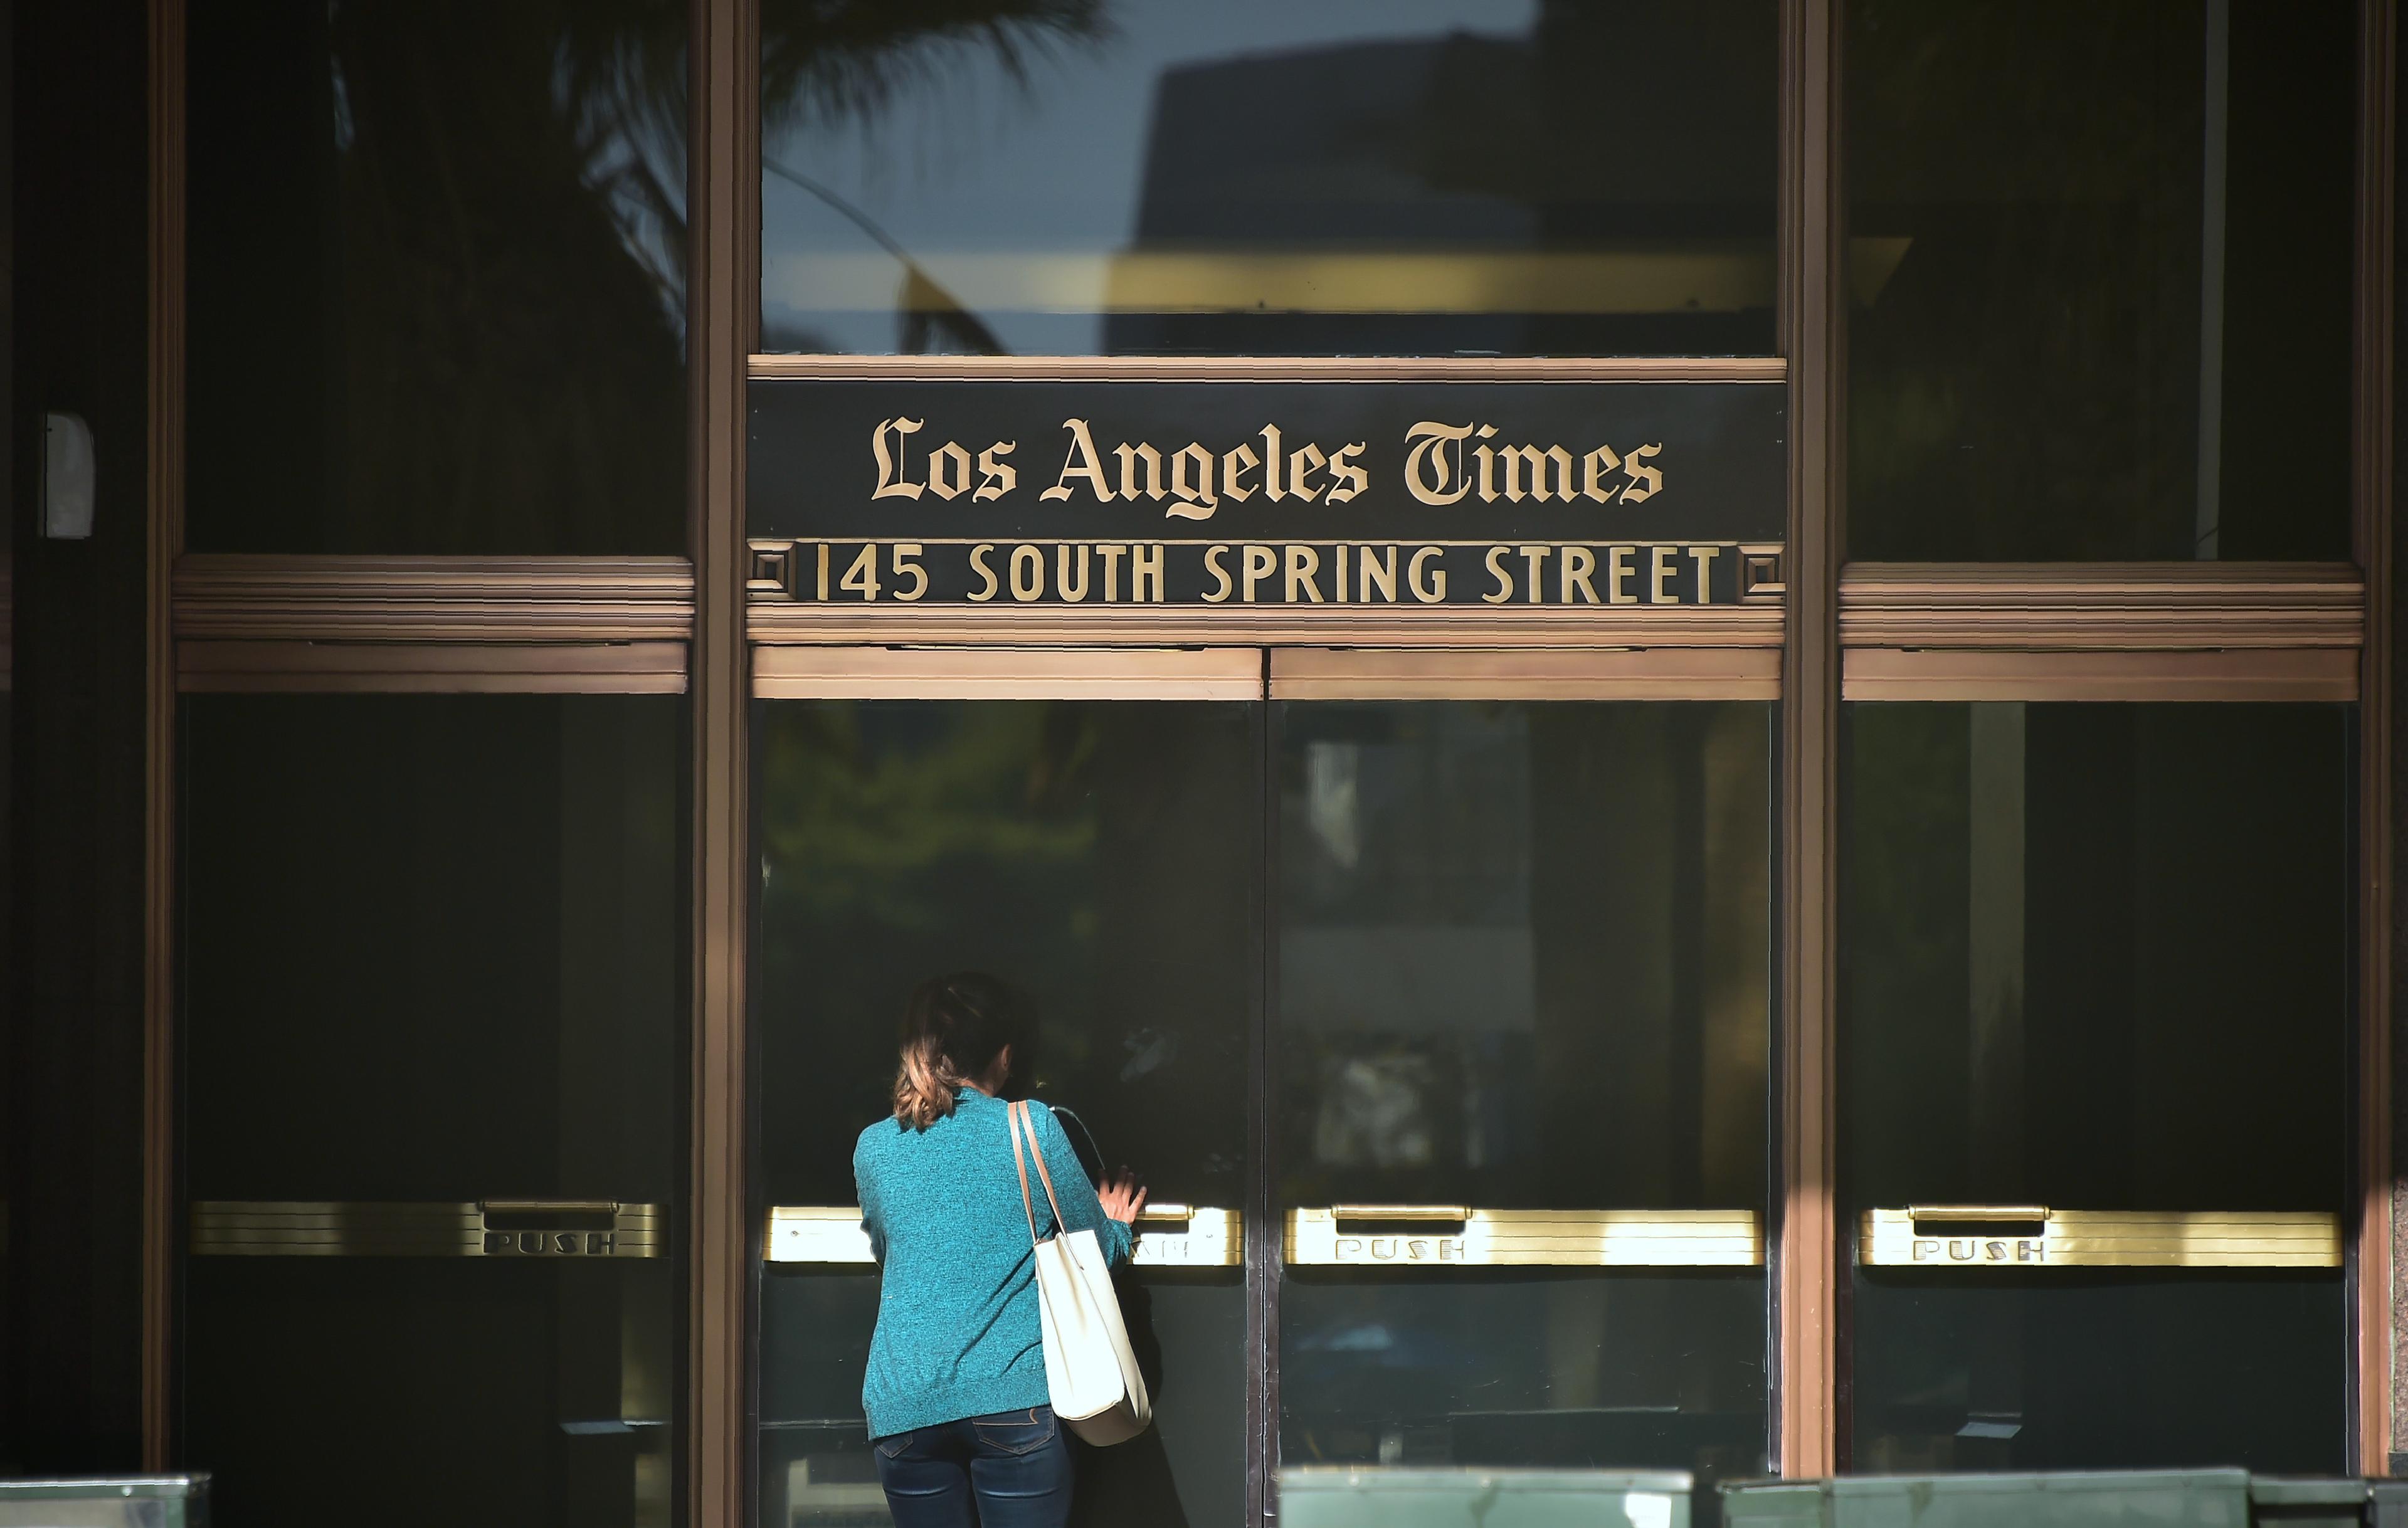 Los Angeles Times Journalists to Conduct One-Day Strike Amid Potential Layoffs